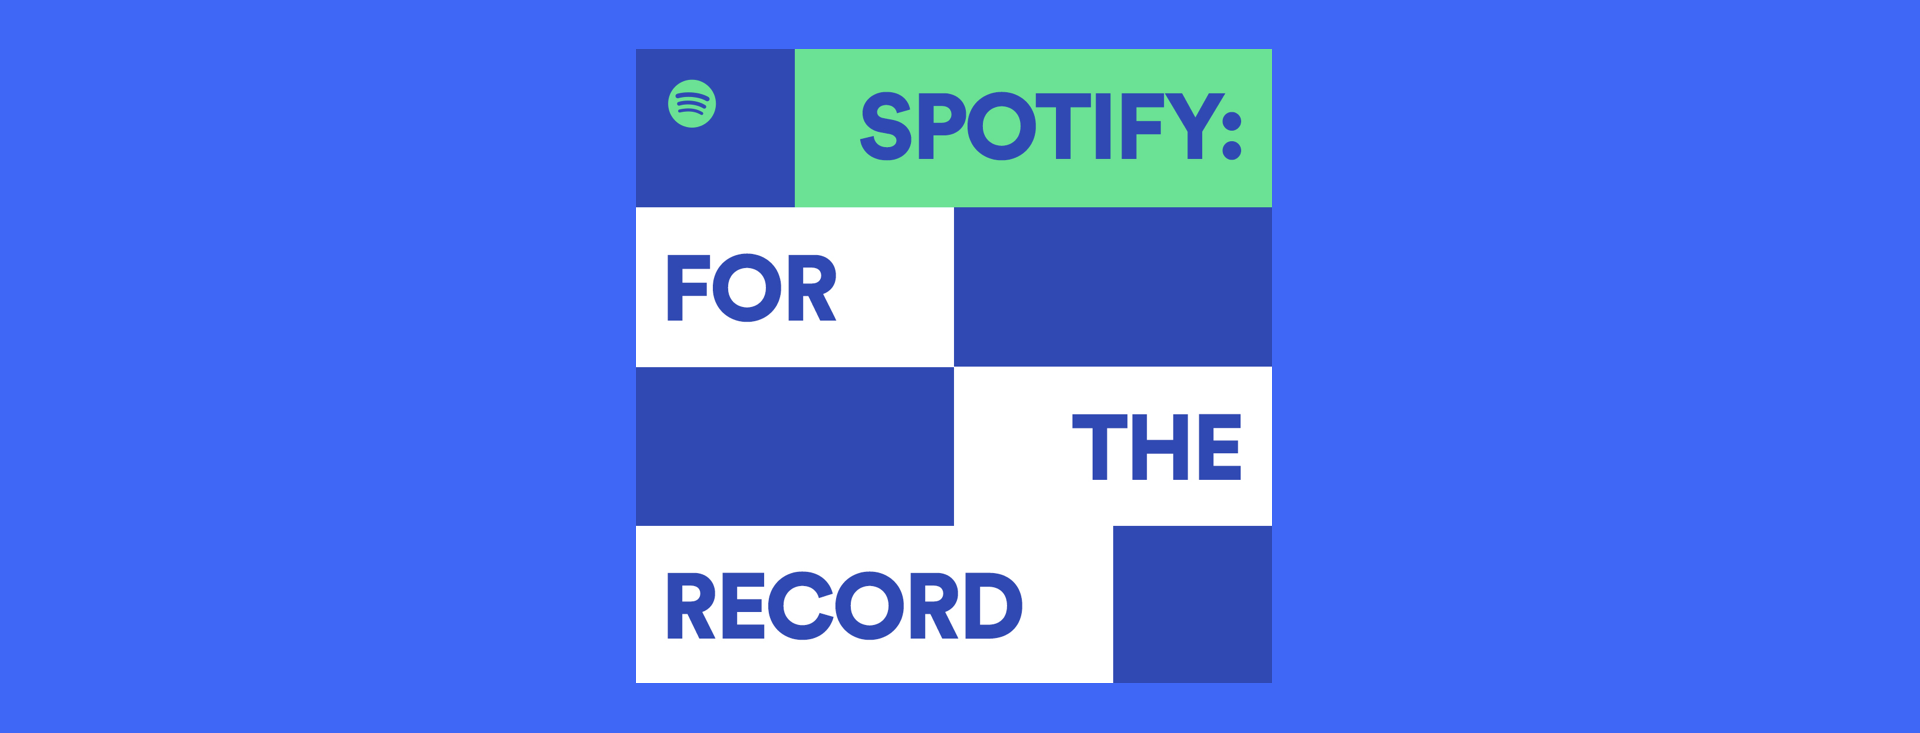 Spotify: For the Record takes listeners behind the scenes of the streaming platform